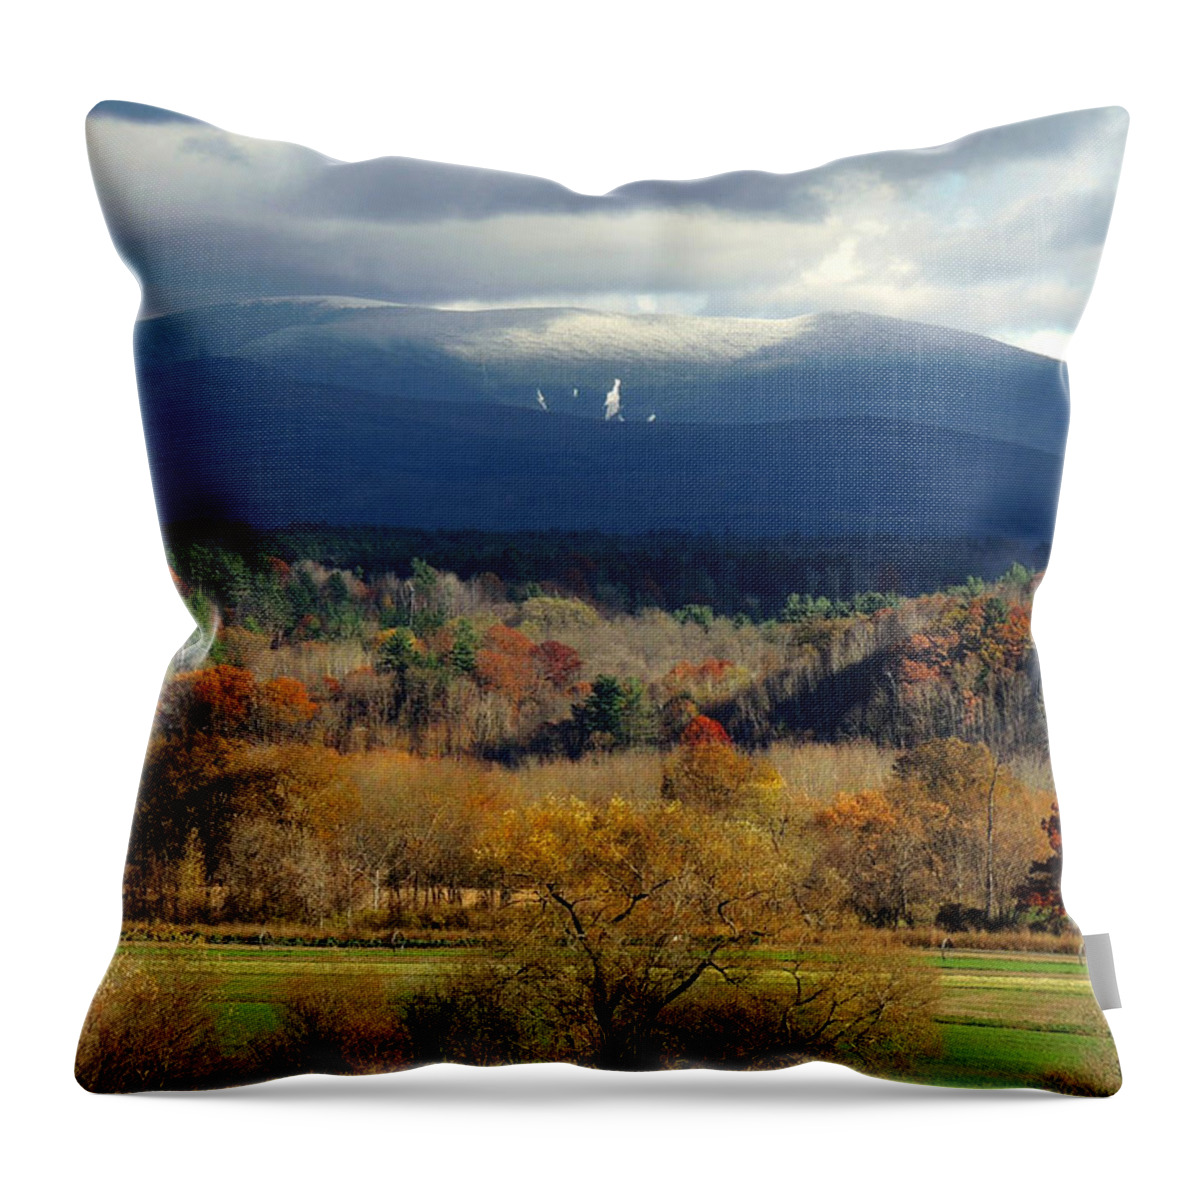 Mount Moosilauke Throw Pillow featuring the photograph Snowcapped Mount Moosilauke by Nancy Griswold